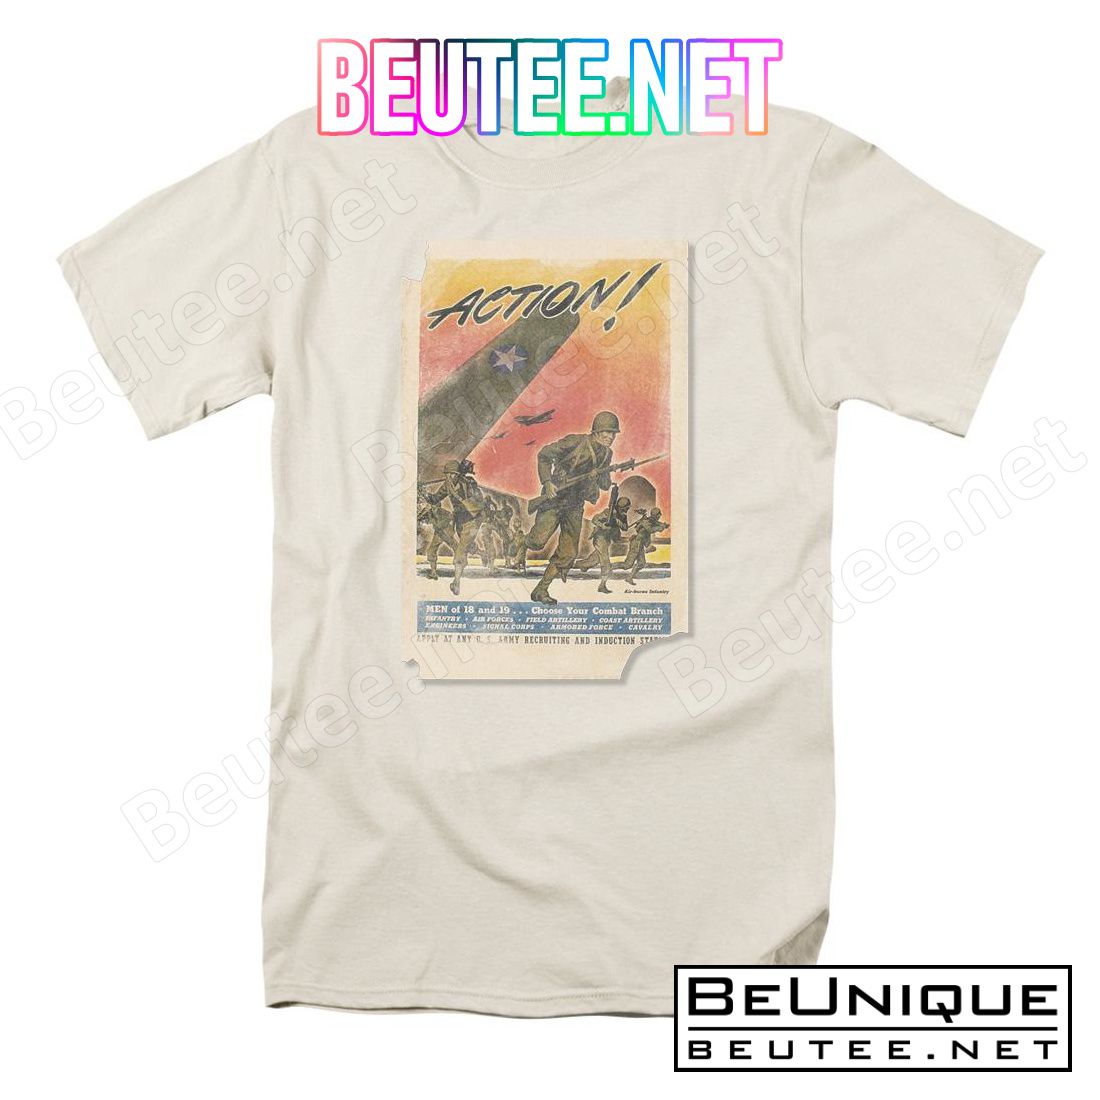 U.S. Army Action Poster T-shirt